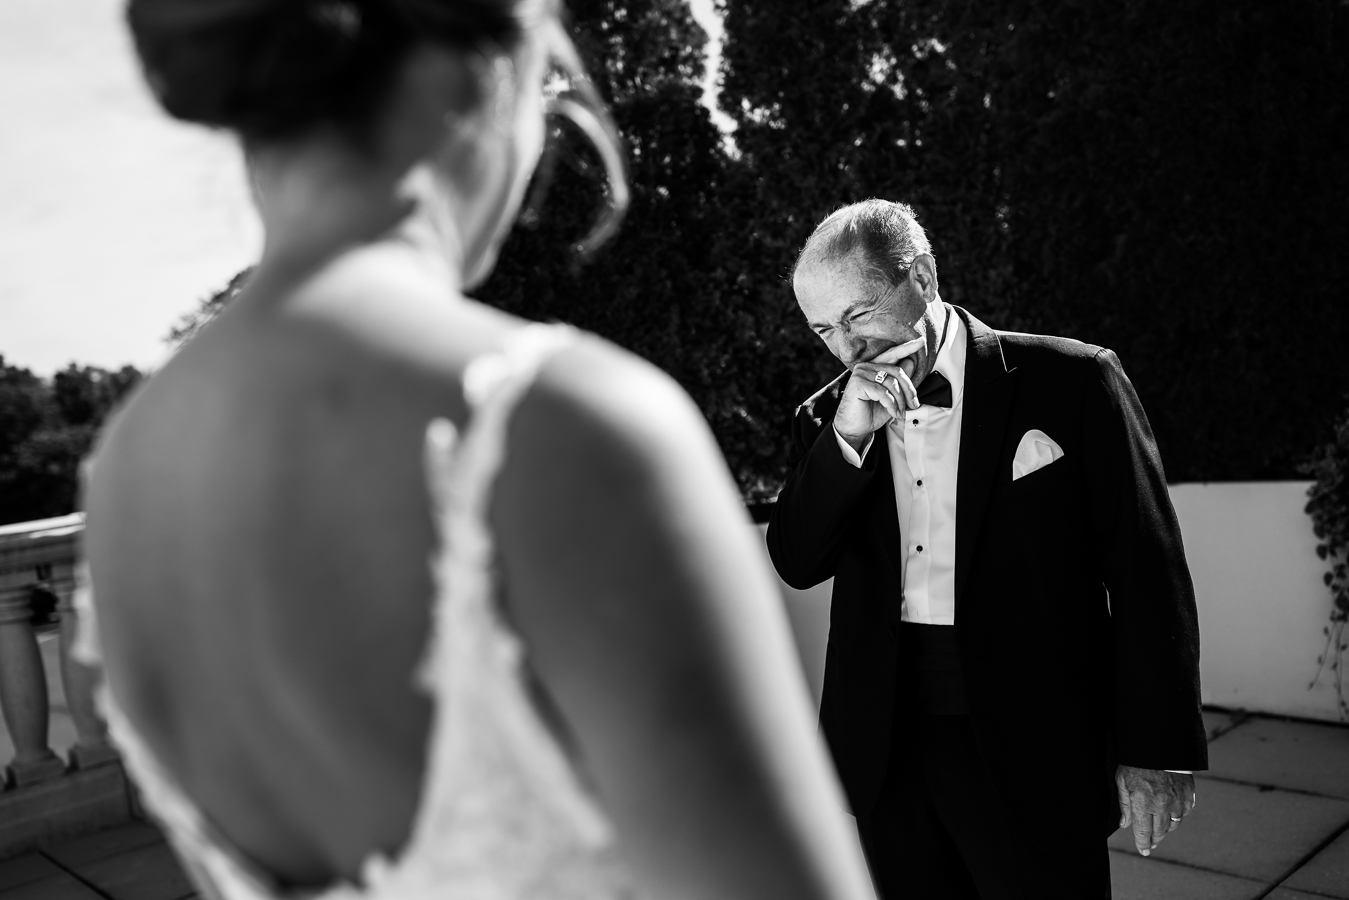 creative nj wedding photographer, rhinehart photography, captures this intimate and sentimental father daughter first look outside of the palace at somerset park in NJ as dad bites his finger after seeing his daughter for the first time in her wedding gown for her black and gold wedding 